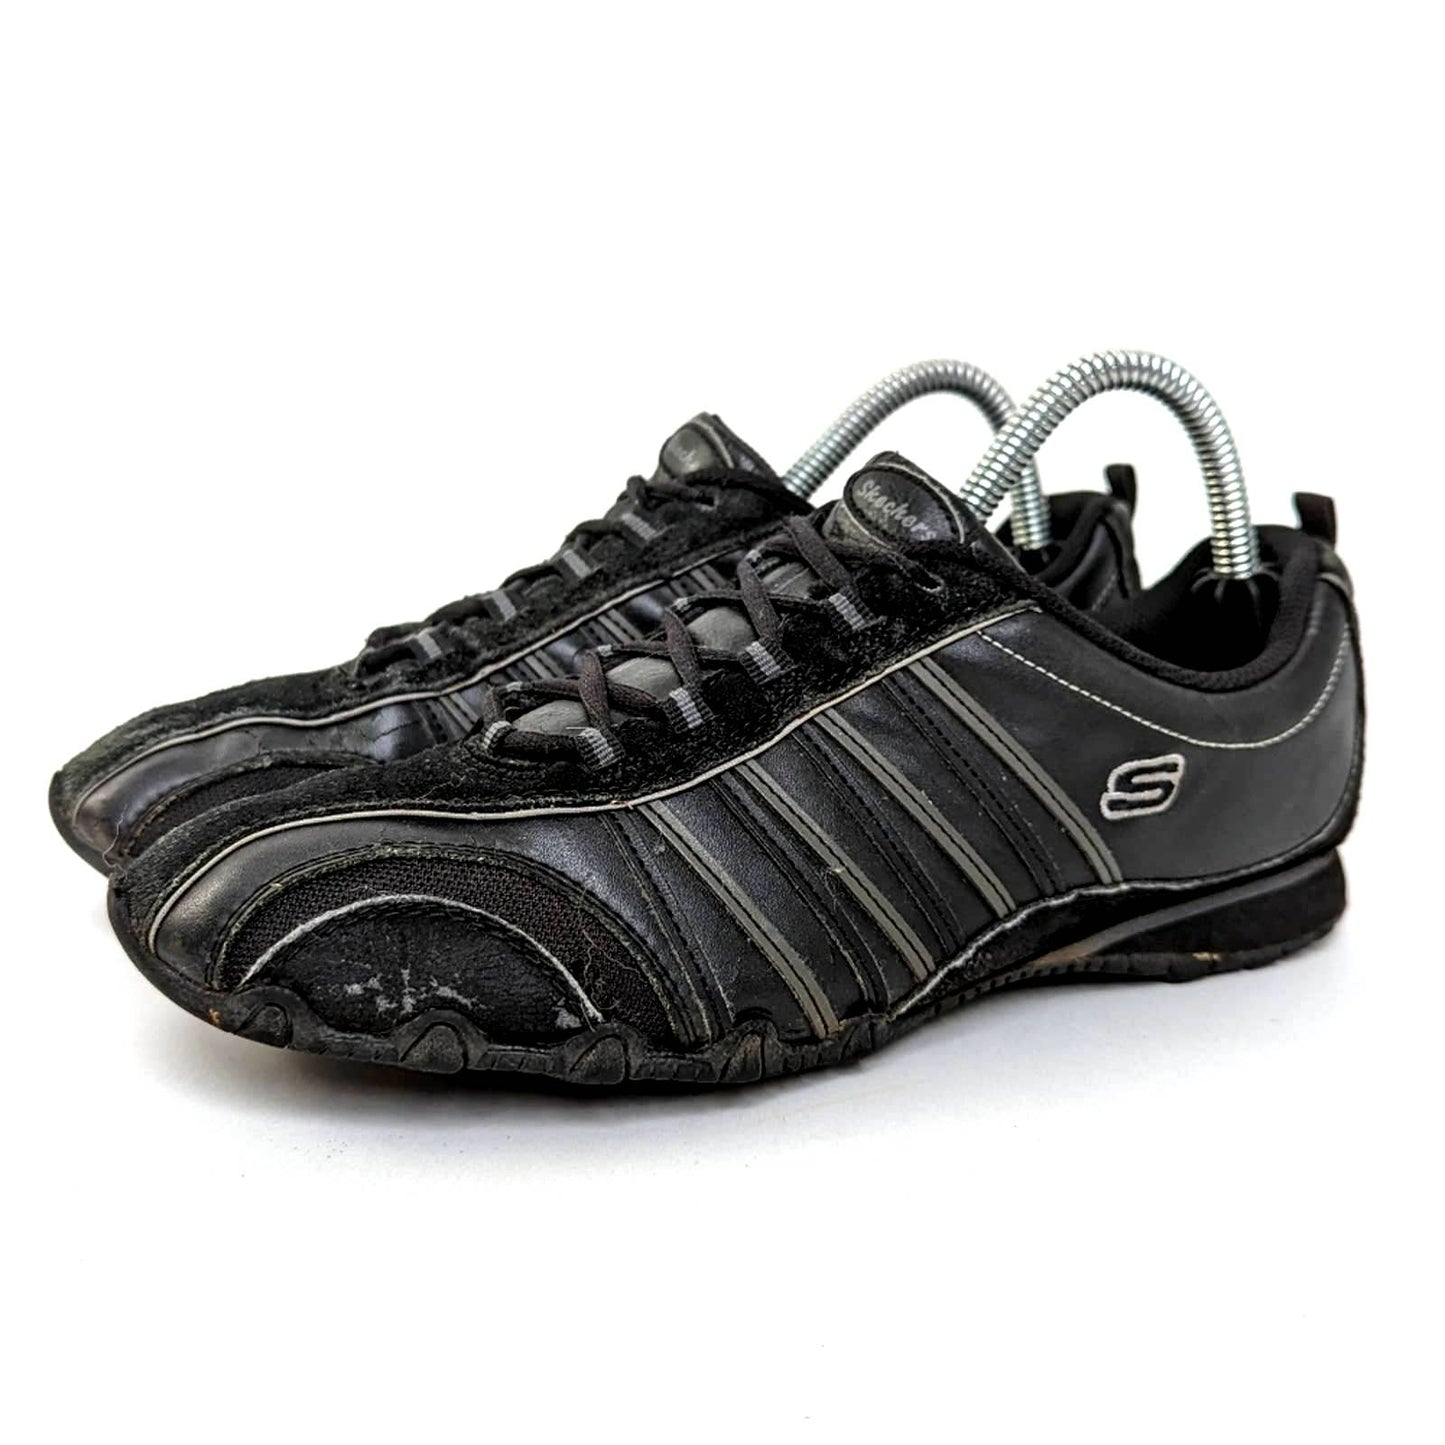 Skechers USA Black Bikers-Troopers Lace-Up Fashion Sneakers - 9